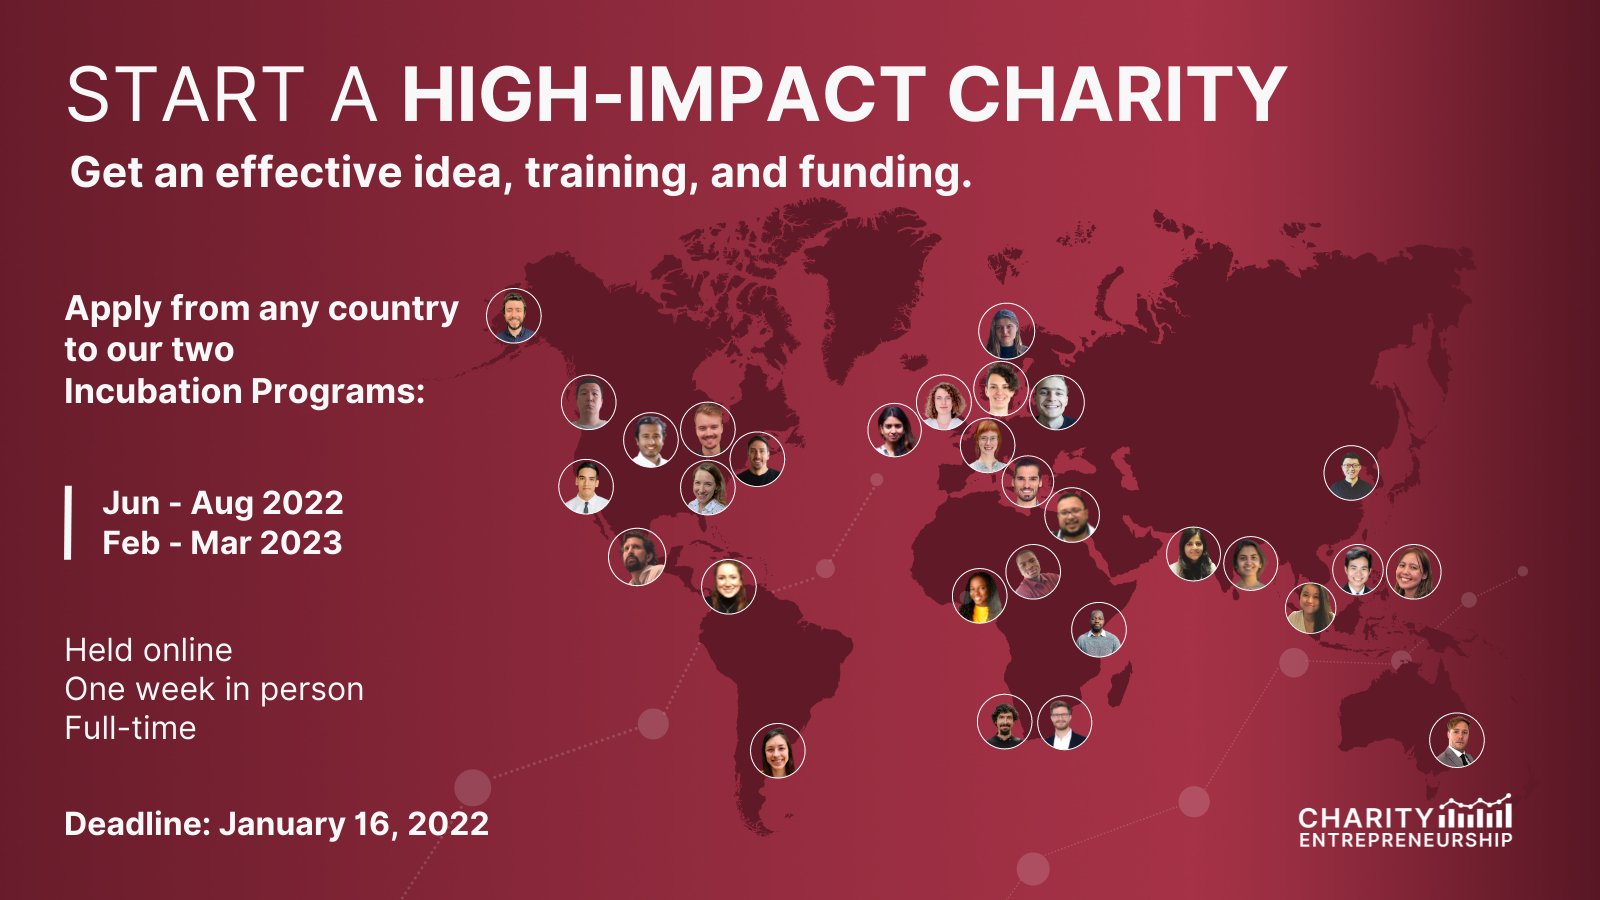 Charity Entrepreneurship Incubation Programs 2022/2023 (fully-funded and up to $175,000 in grants)